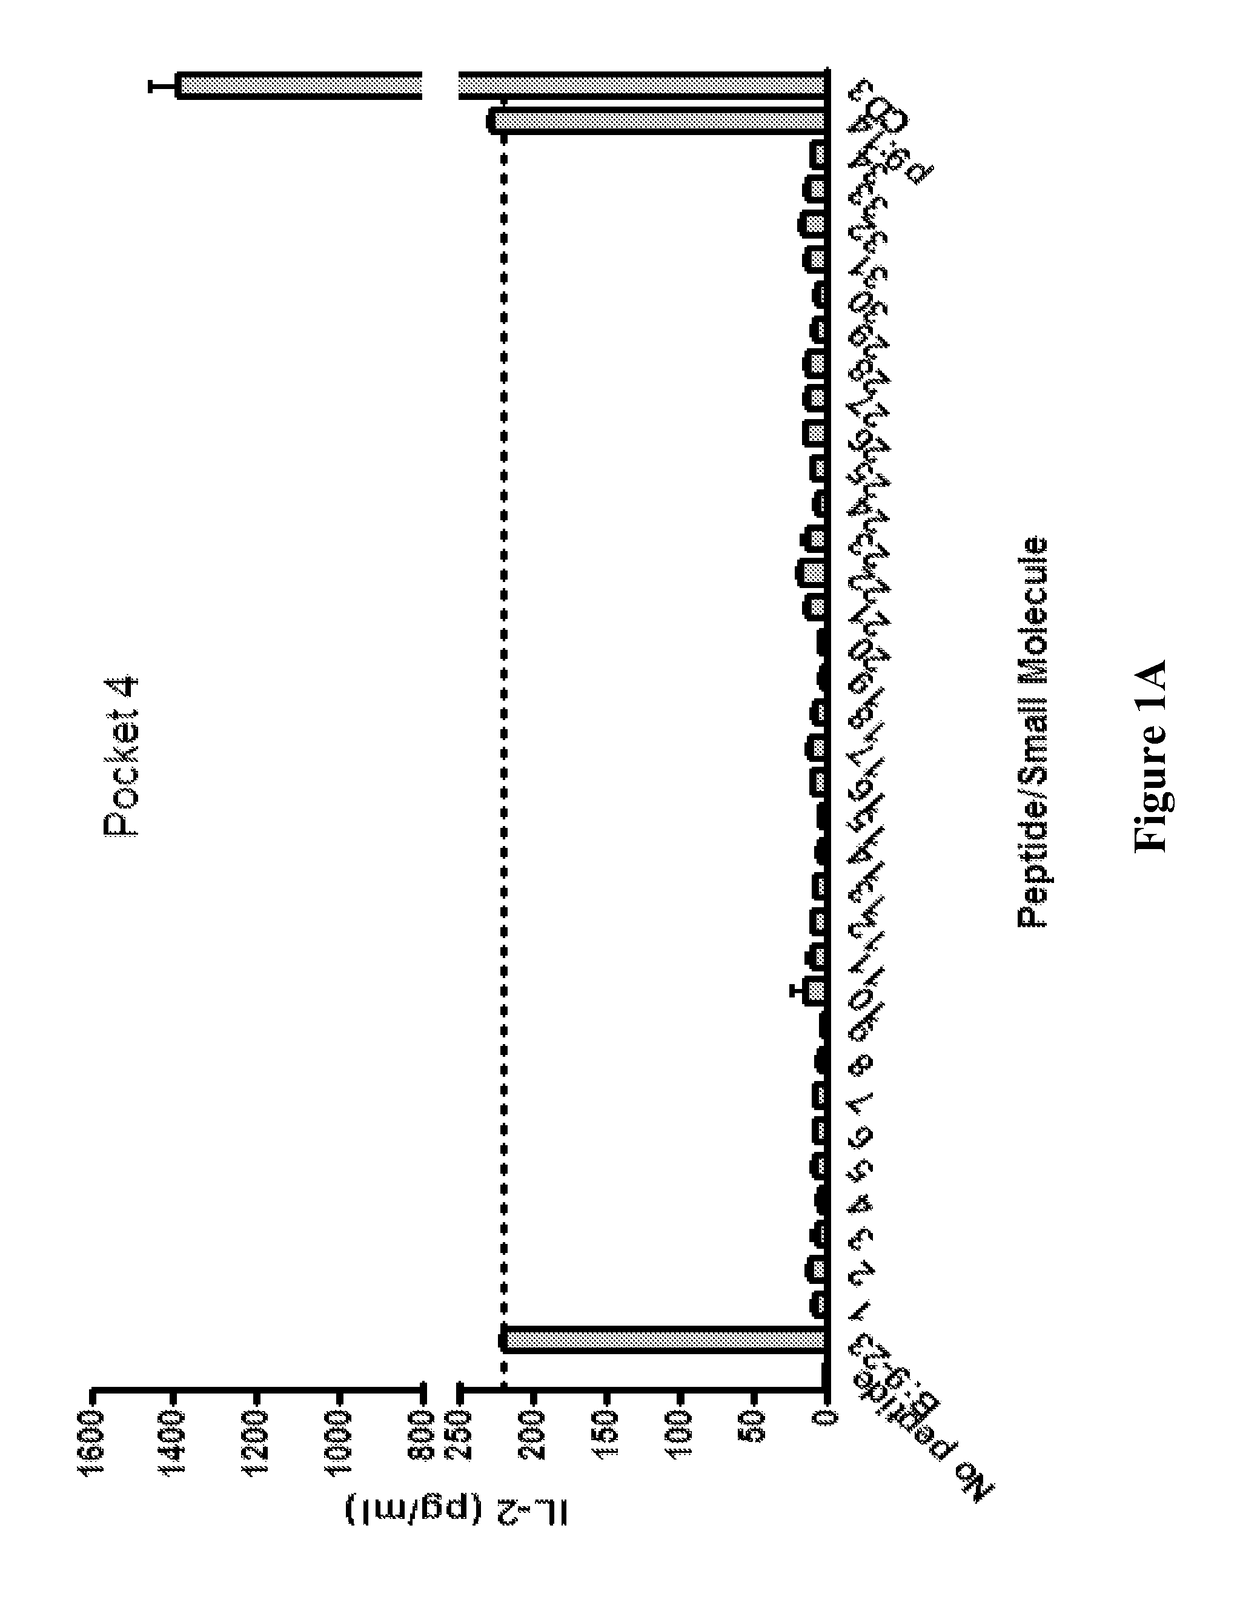 Compounds that modulate autoimmunity and methods of using the same